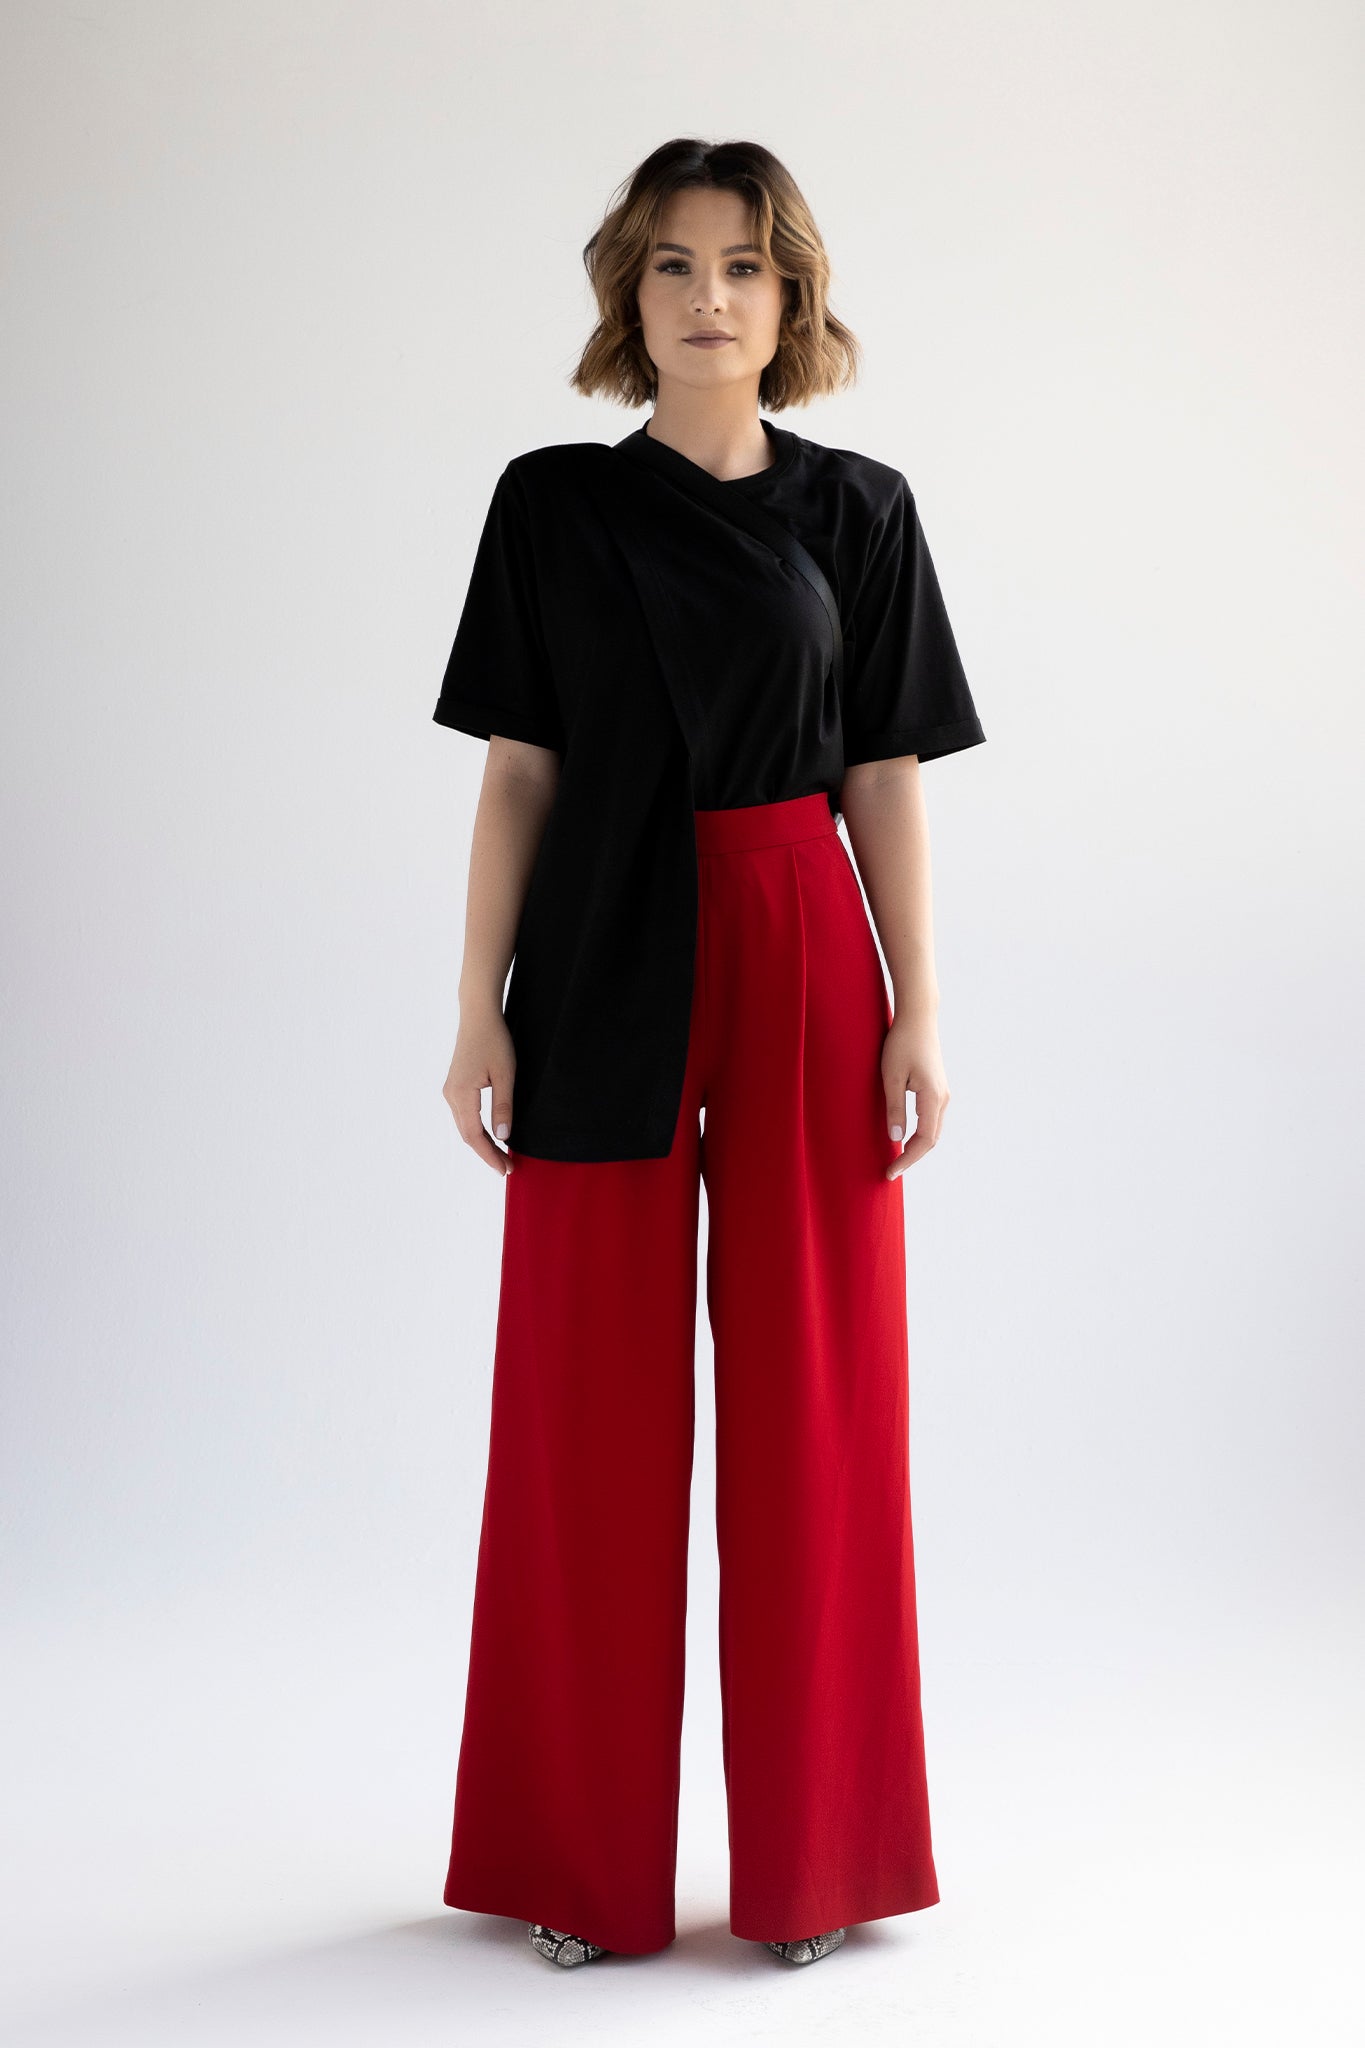 High waist wide leg pleated pants in red